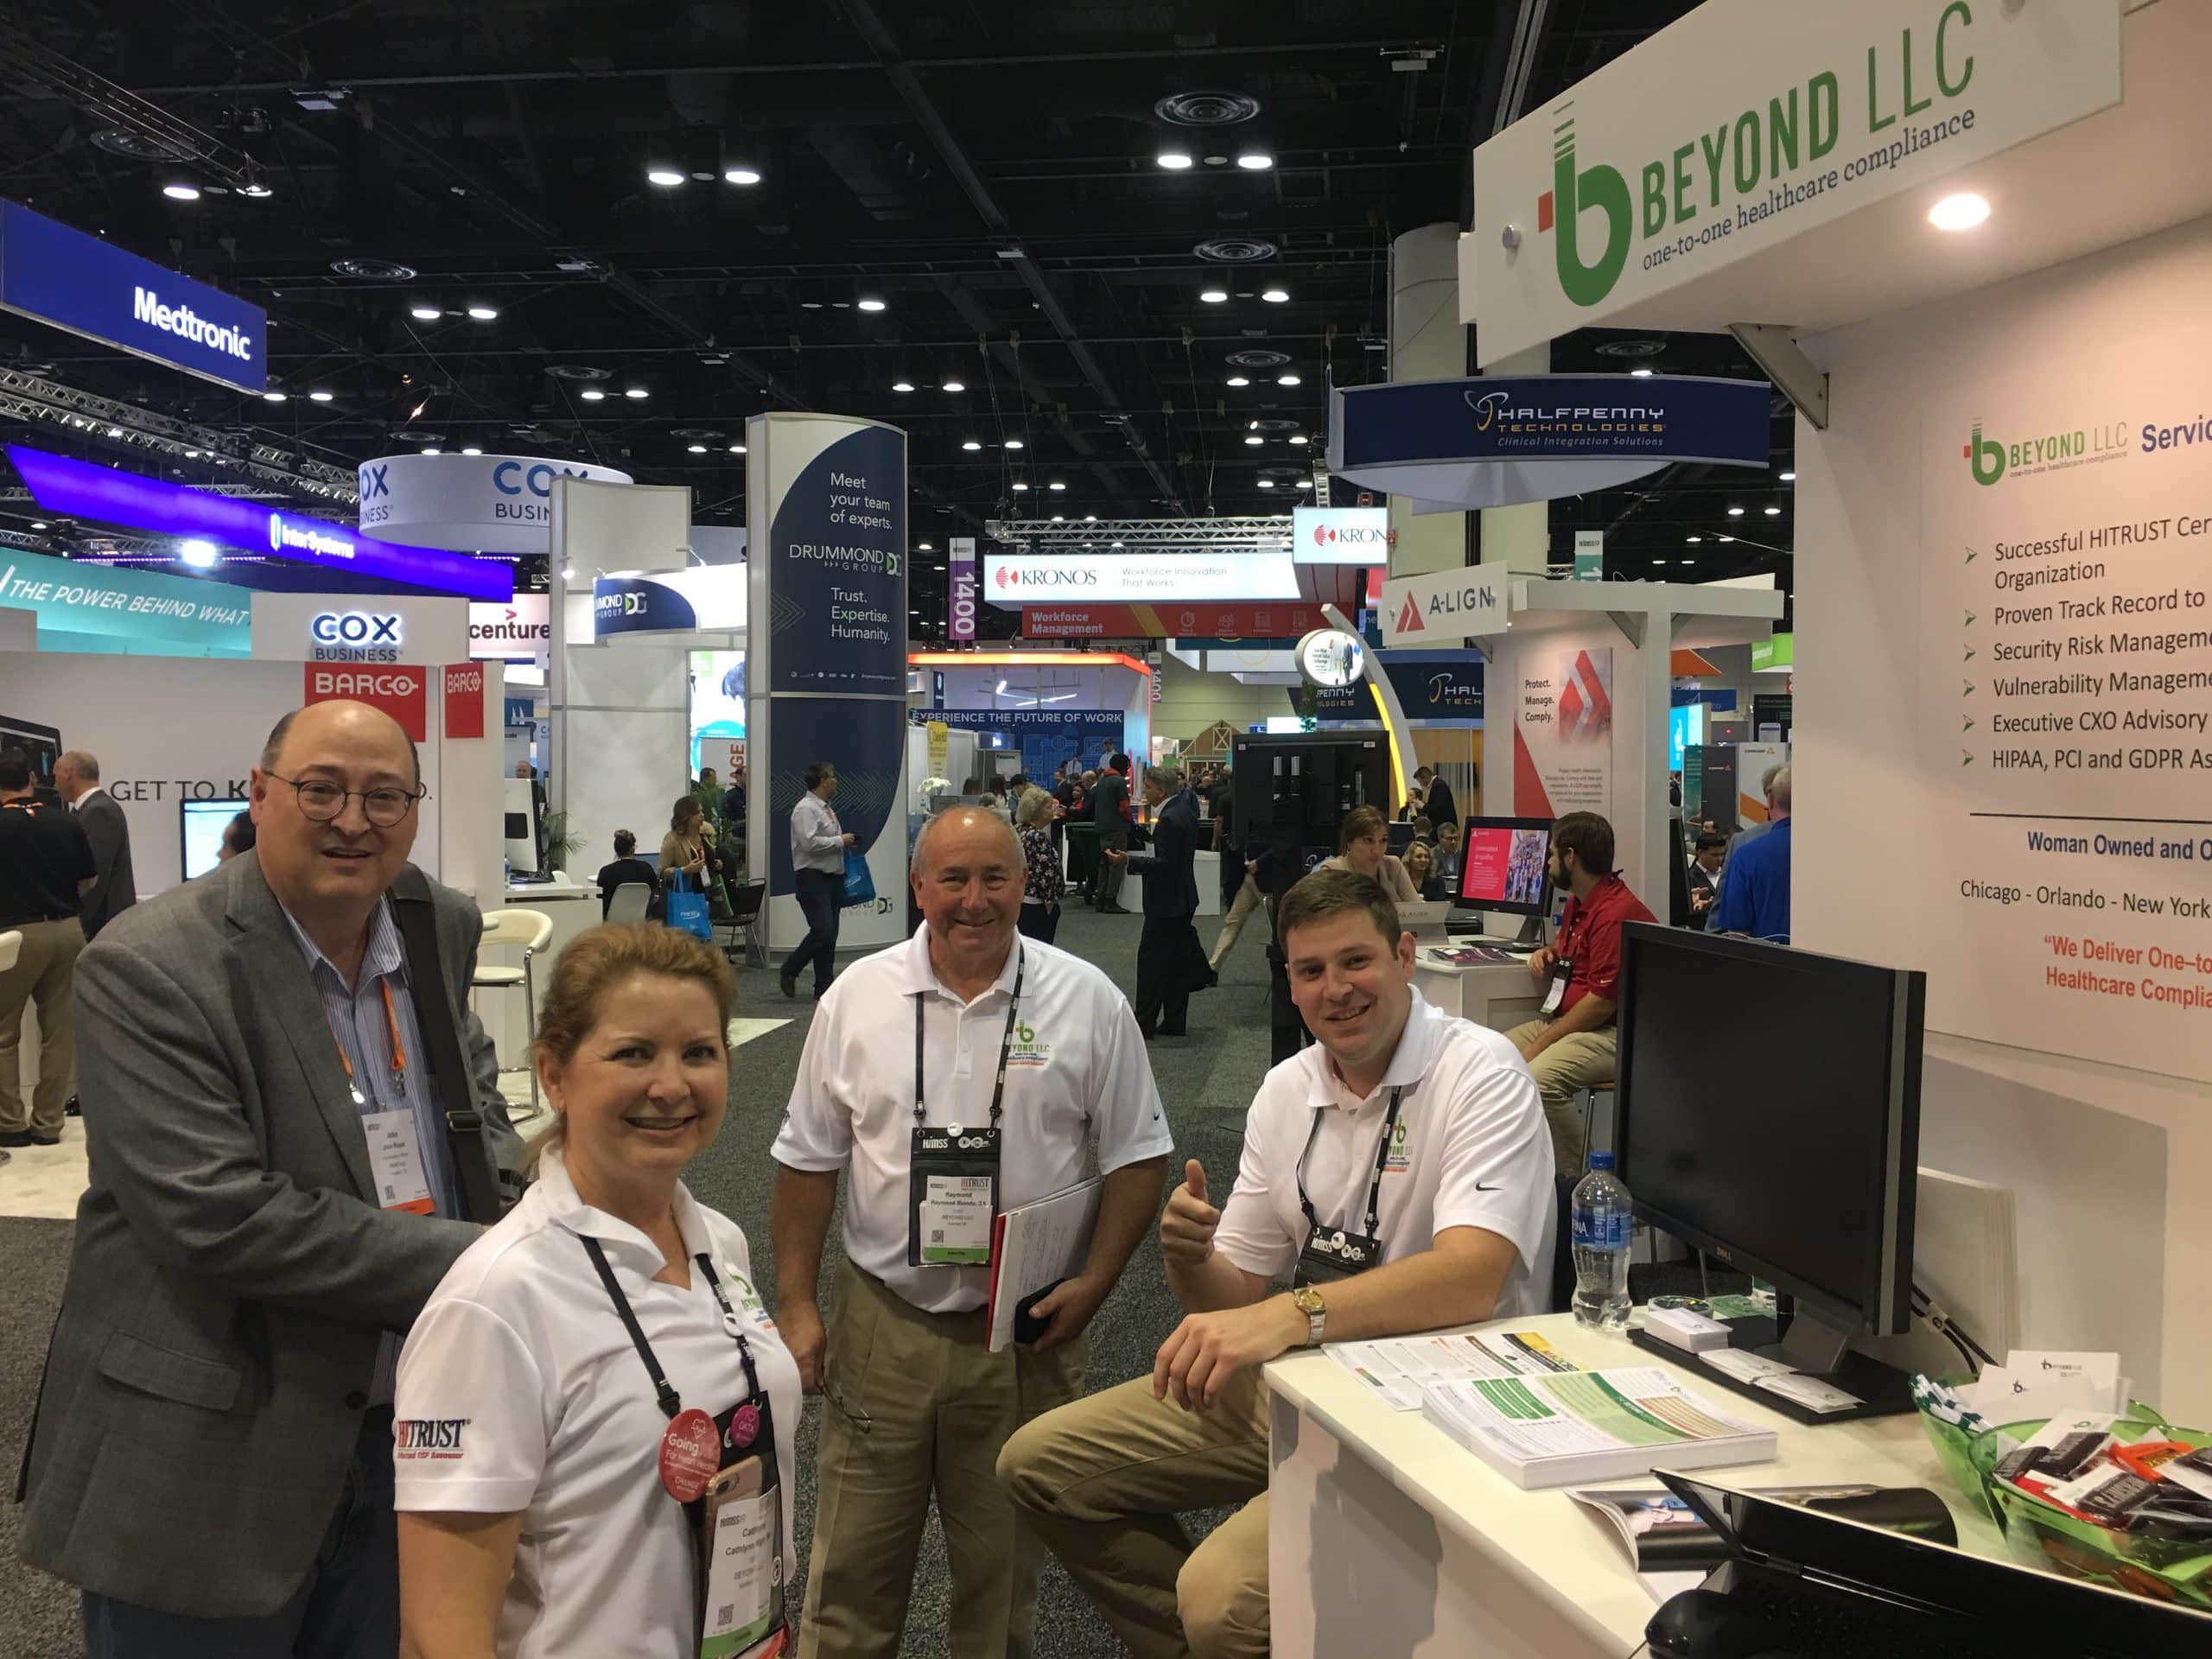 People we met at HIMSS19 Orlando (with pictures)